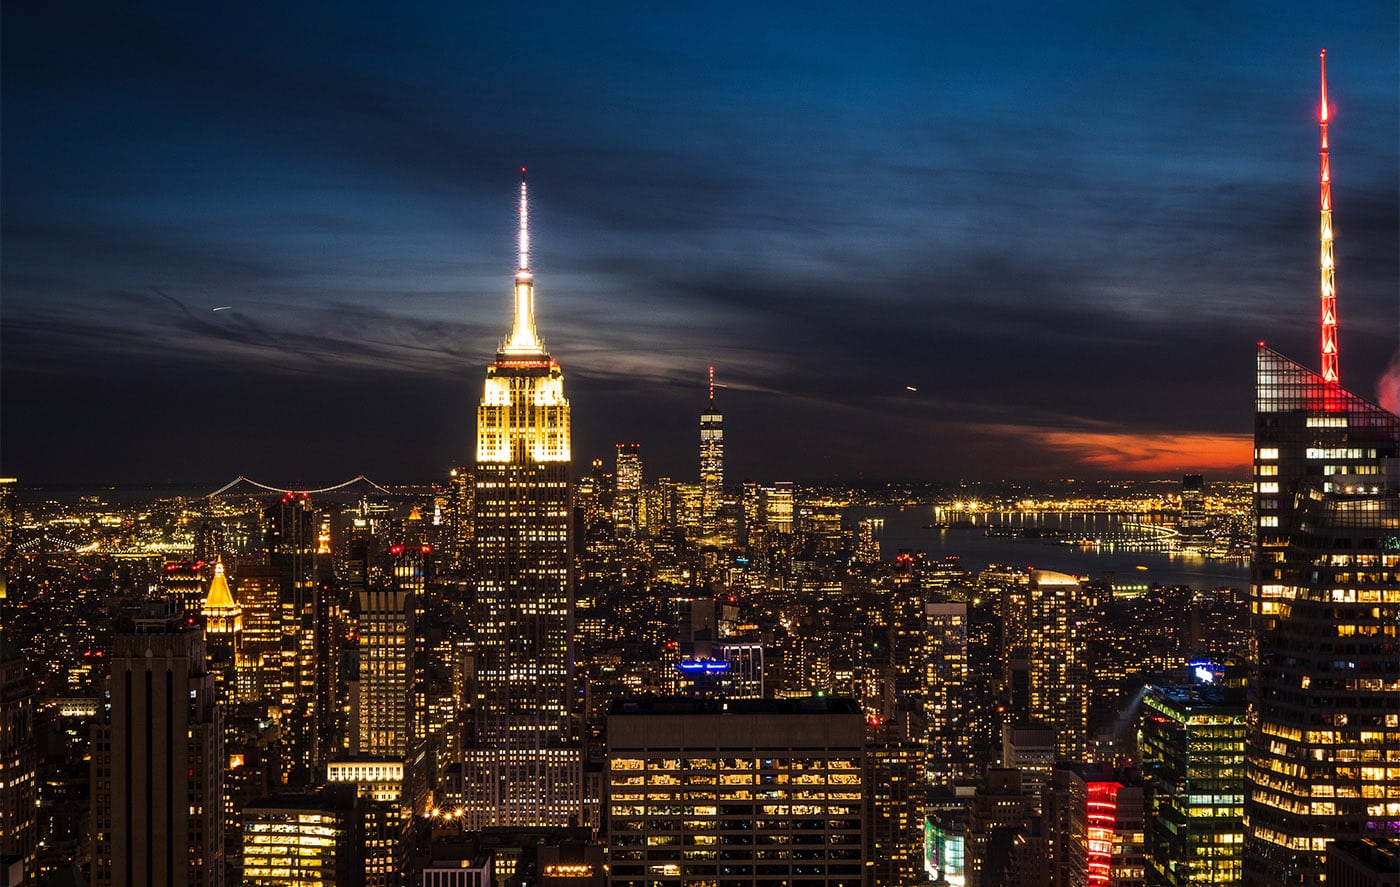 The 10 most beautiful photo spots in New York 11